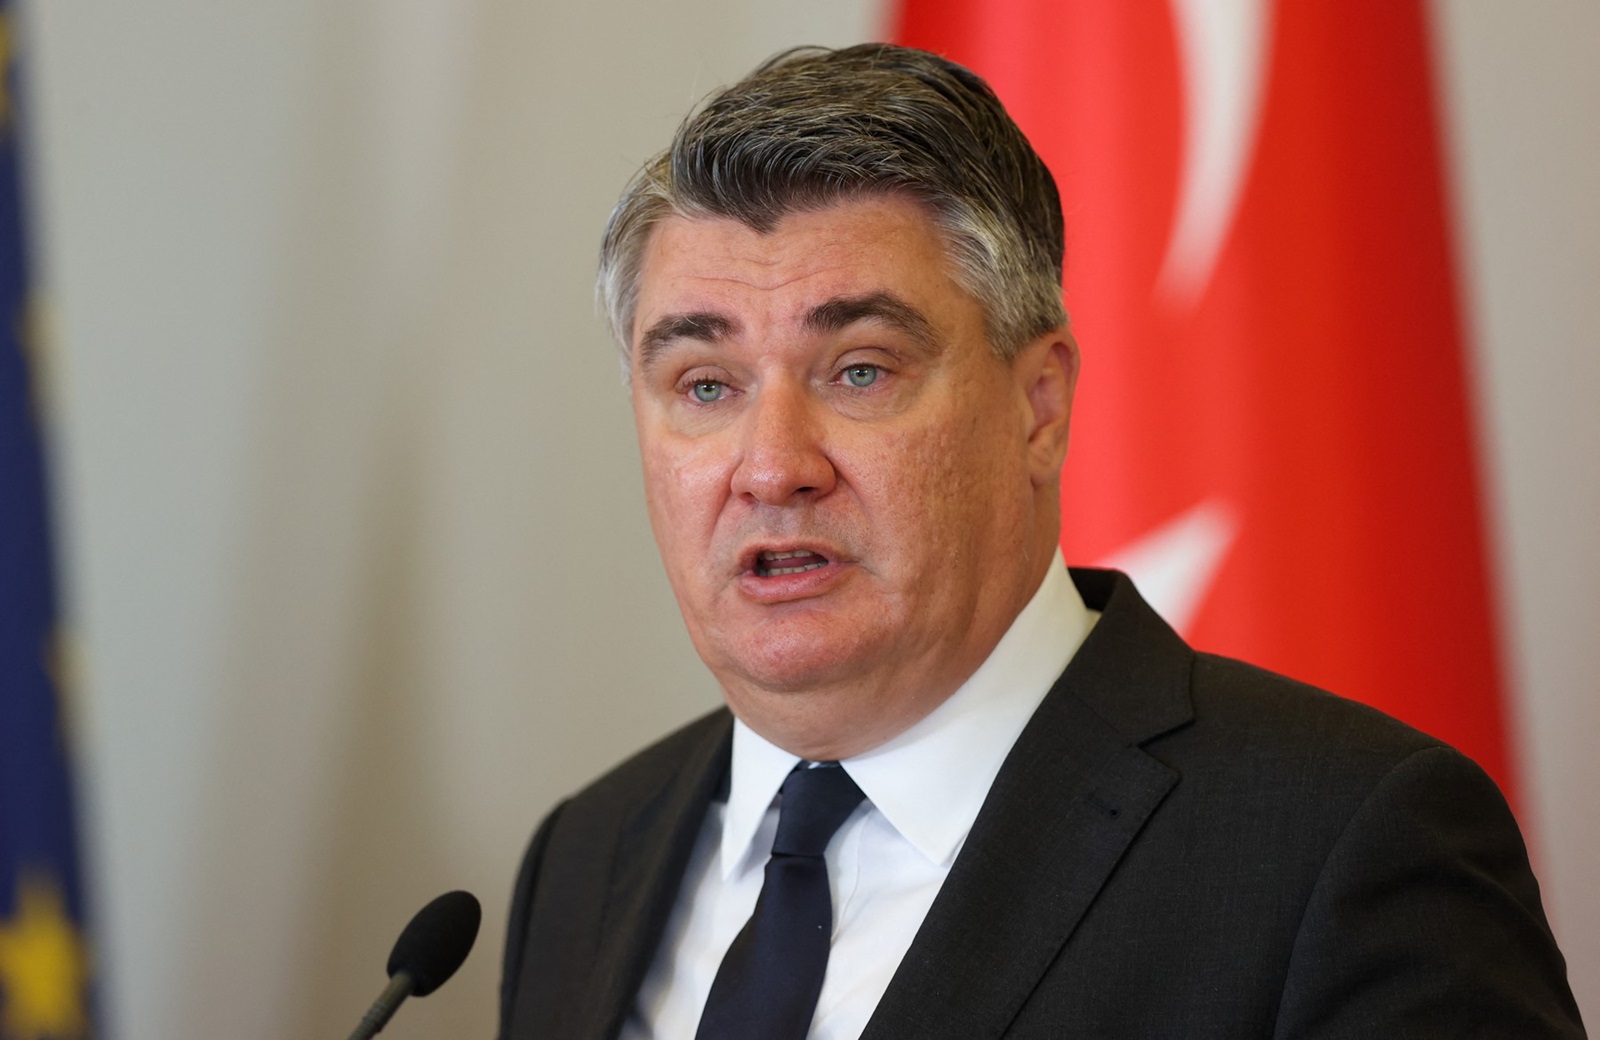 Croatian President Zoran Milanovic and his Turkish counterpart take part in a joint press conference at the Presidential office in Zagreb on September 8, 2022.,Image: 720577846, License: Rights-managed, Restrictions: , Model Release: no, Credit line: DAMIR SENCAR / AFP / Profimedia